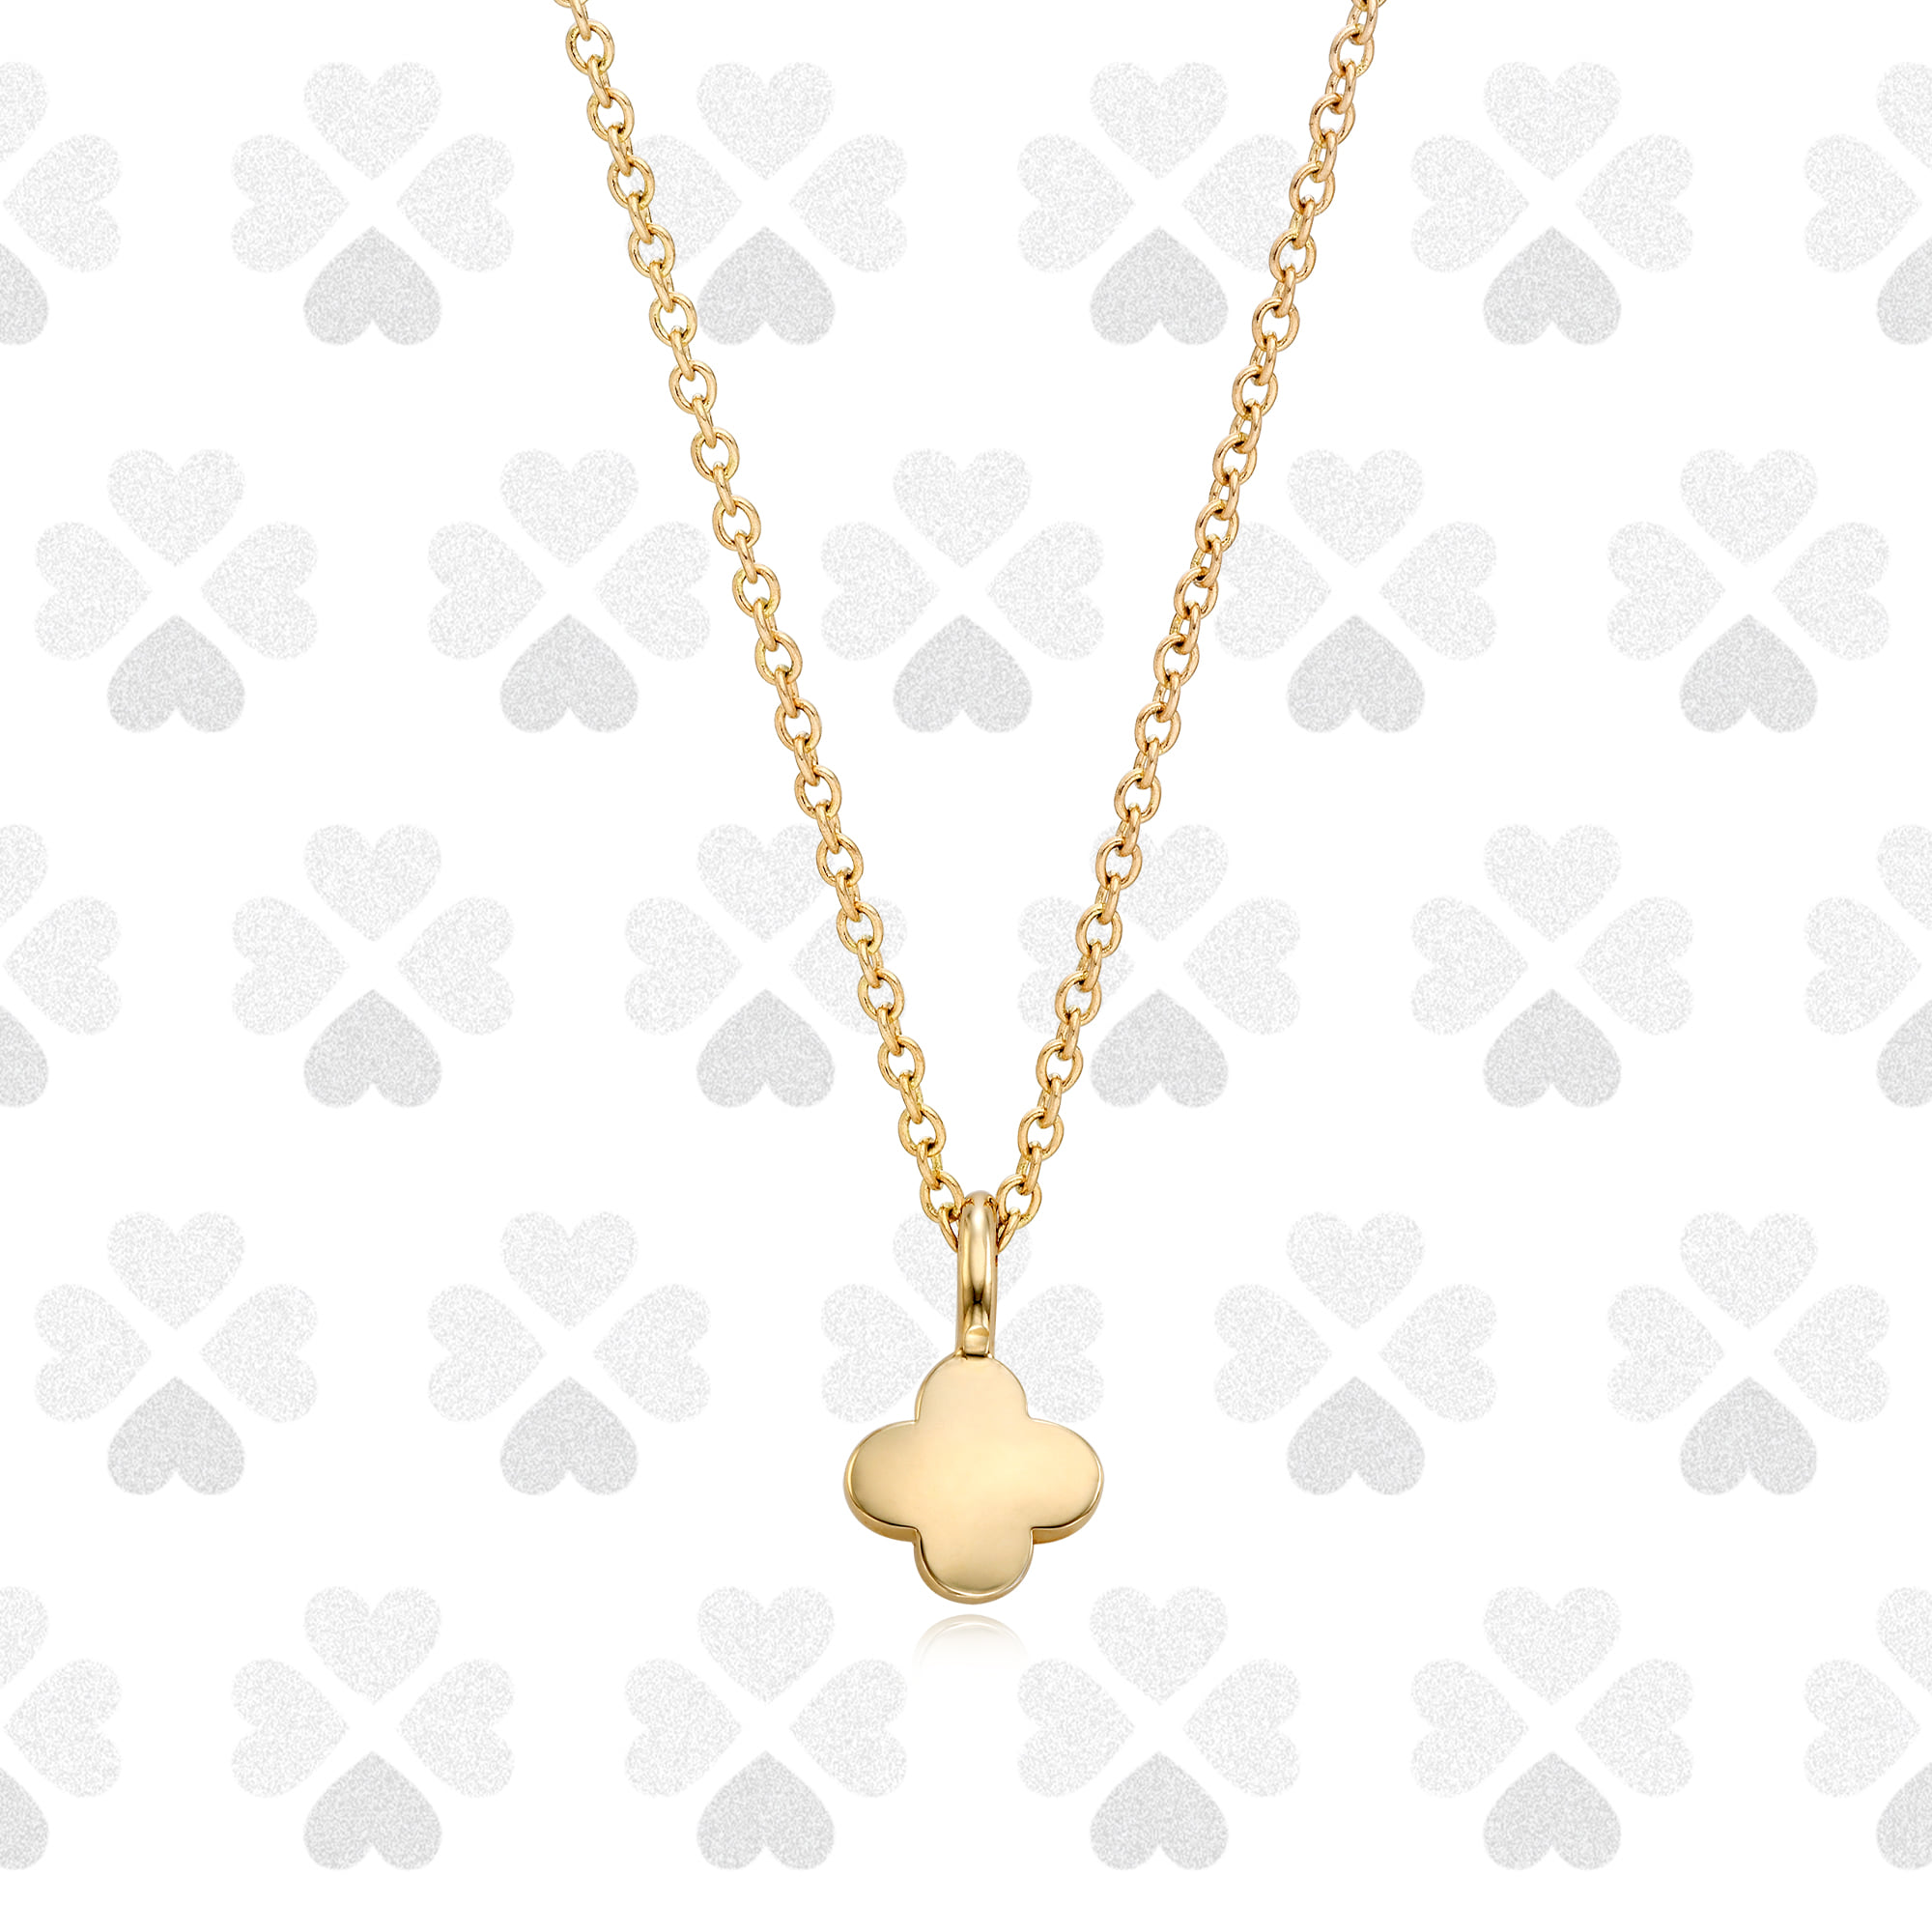 14K/18K Gold Caille Wish Necklace - Clover Luck that you can only see if you find it